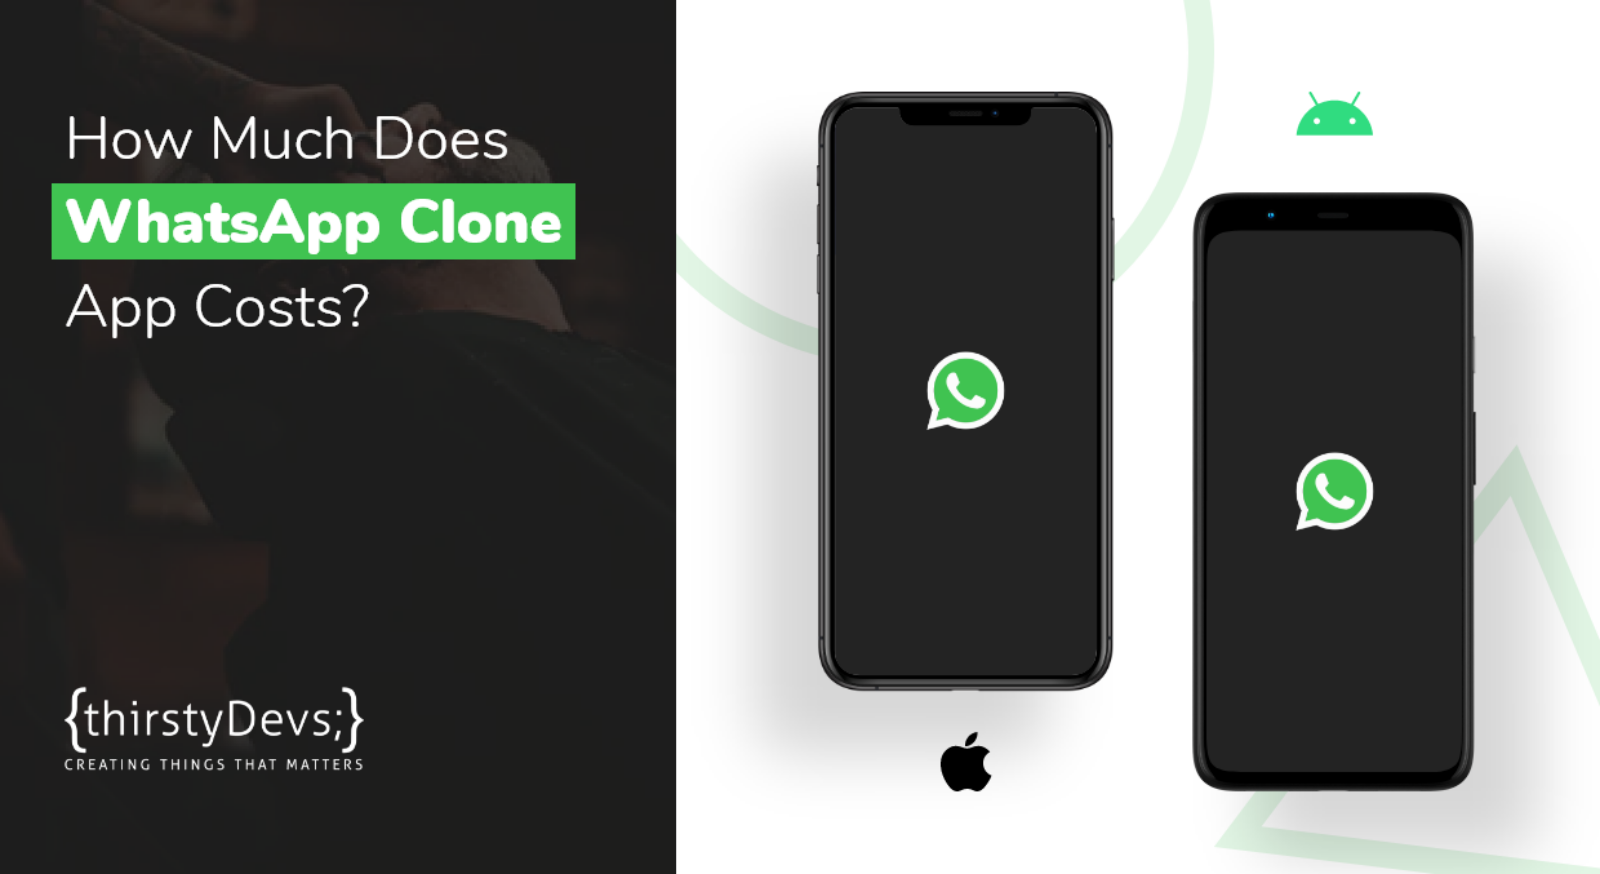 How Much Does WhatsApp Clone App Costs